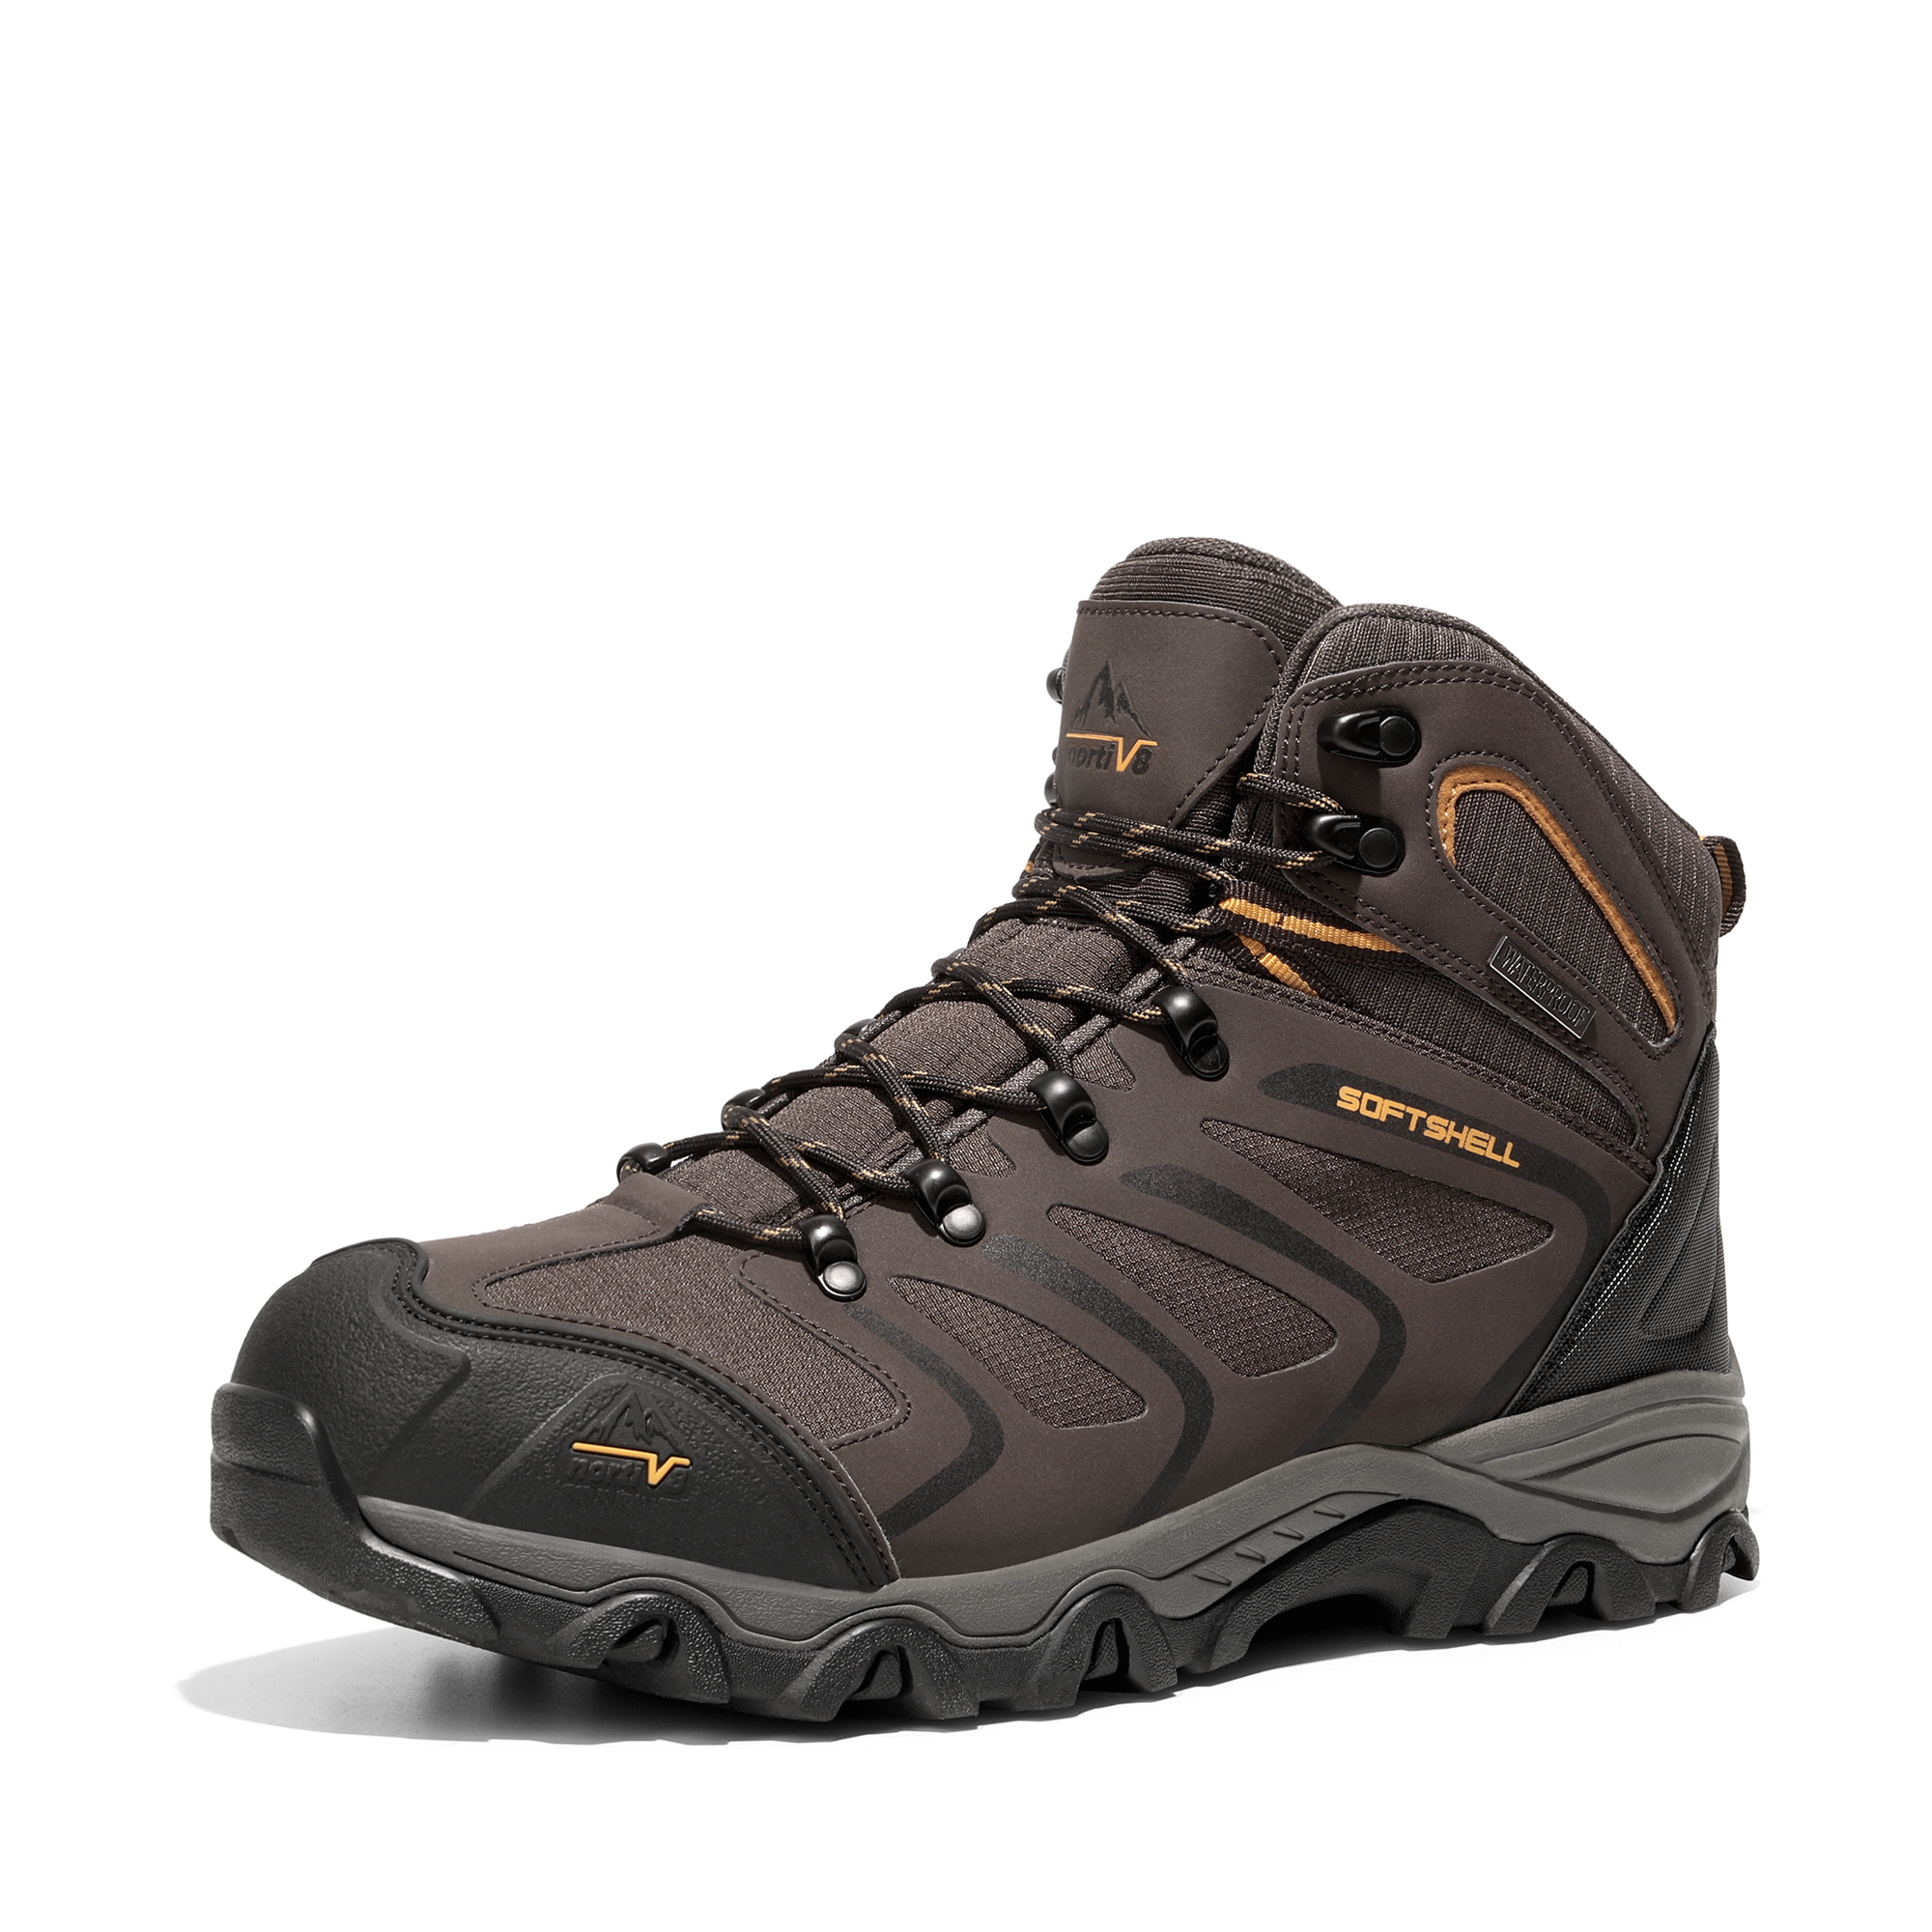 Best Waterproof Hiking Boots For Under $60 - Testing The Nortiv8 on a 5-Day  Trek 